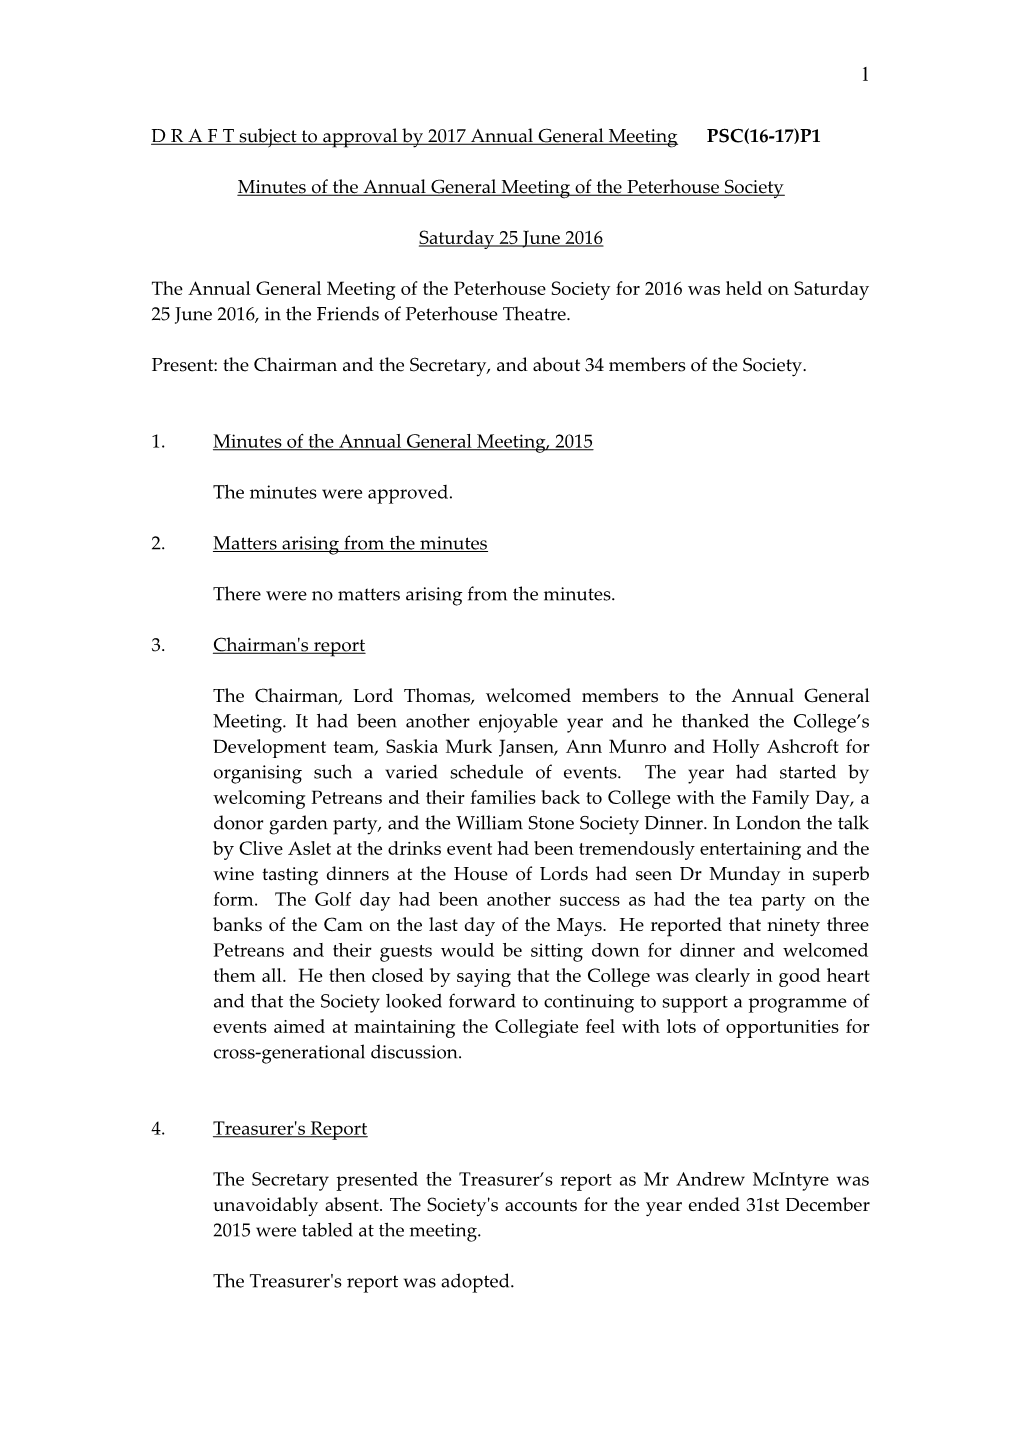 Minutes of the Annual General Meeting of the Peterhouse Society